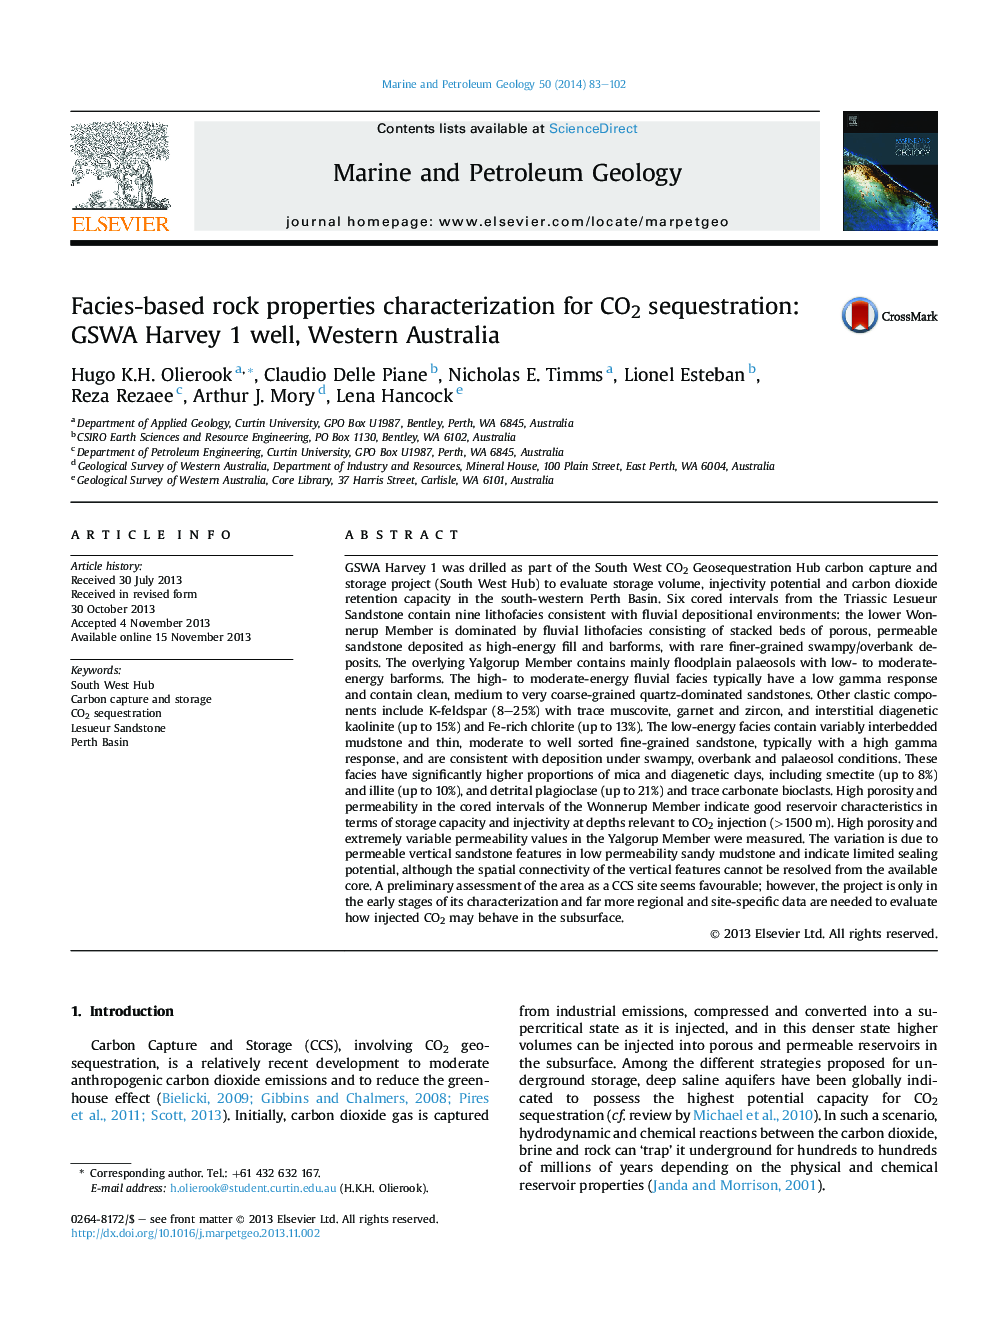 Facies-based rock properties characterization for CO2 sequestration: GSWA Harvey 1 well, Western Australia